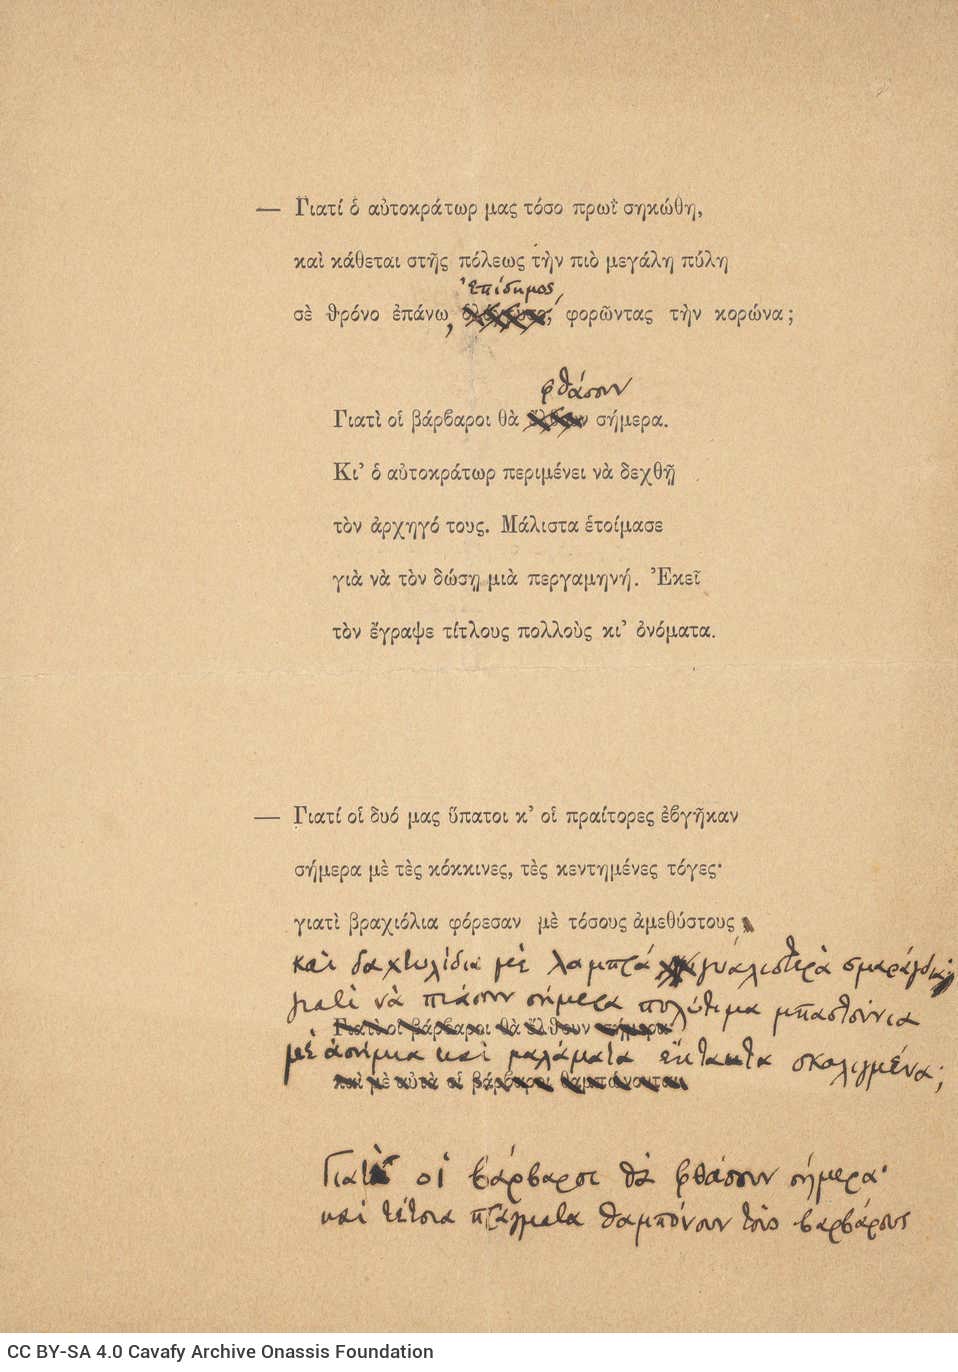 Two printed sheets with the poem "Waiting for the Barbarians". The verso of the second sheet, the lower part of which has bee